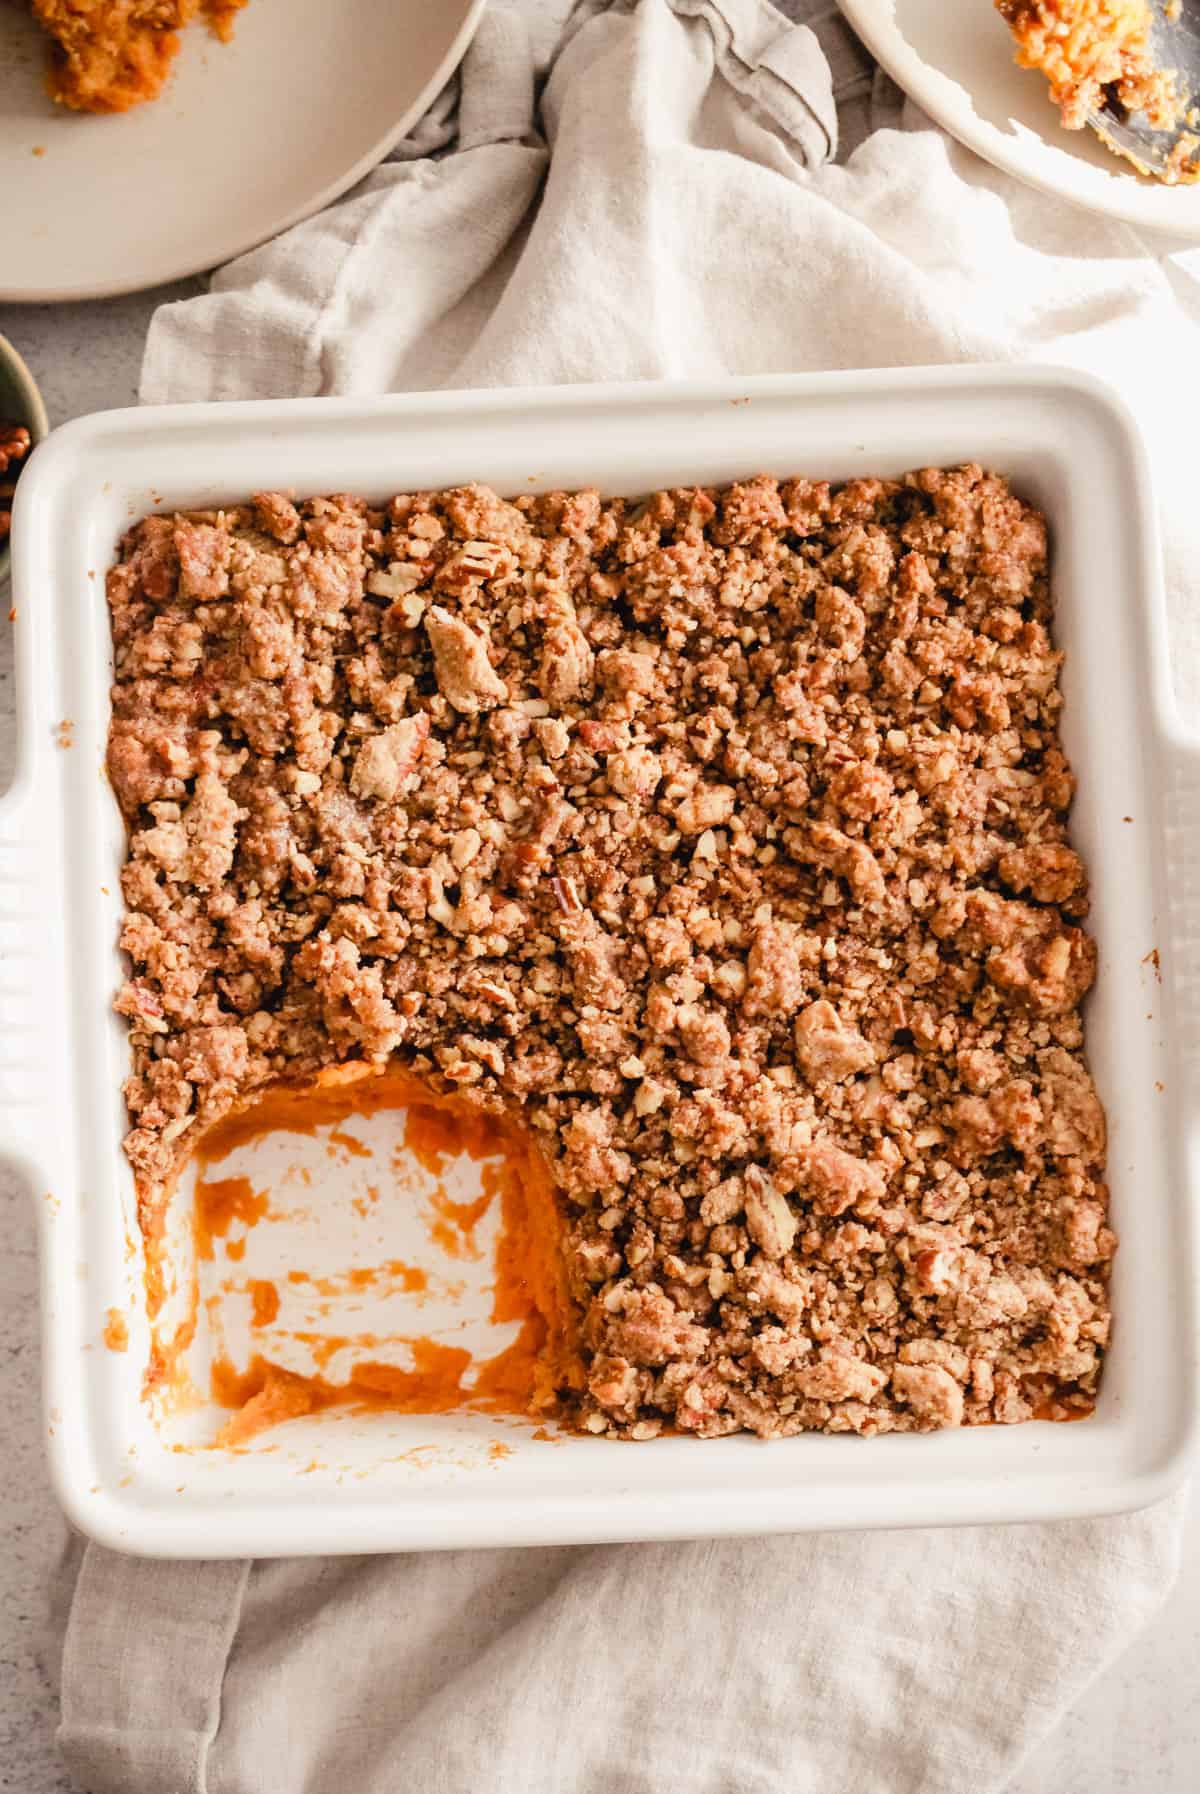 Overhead image of a sweet potato casserole in a square baking dish.